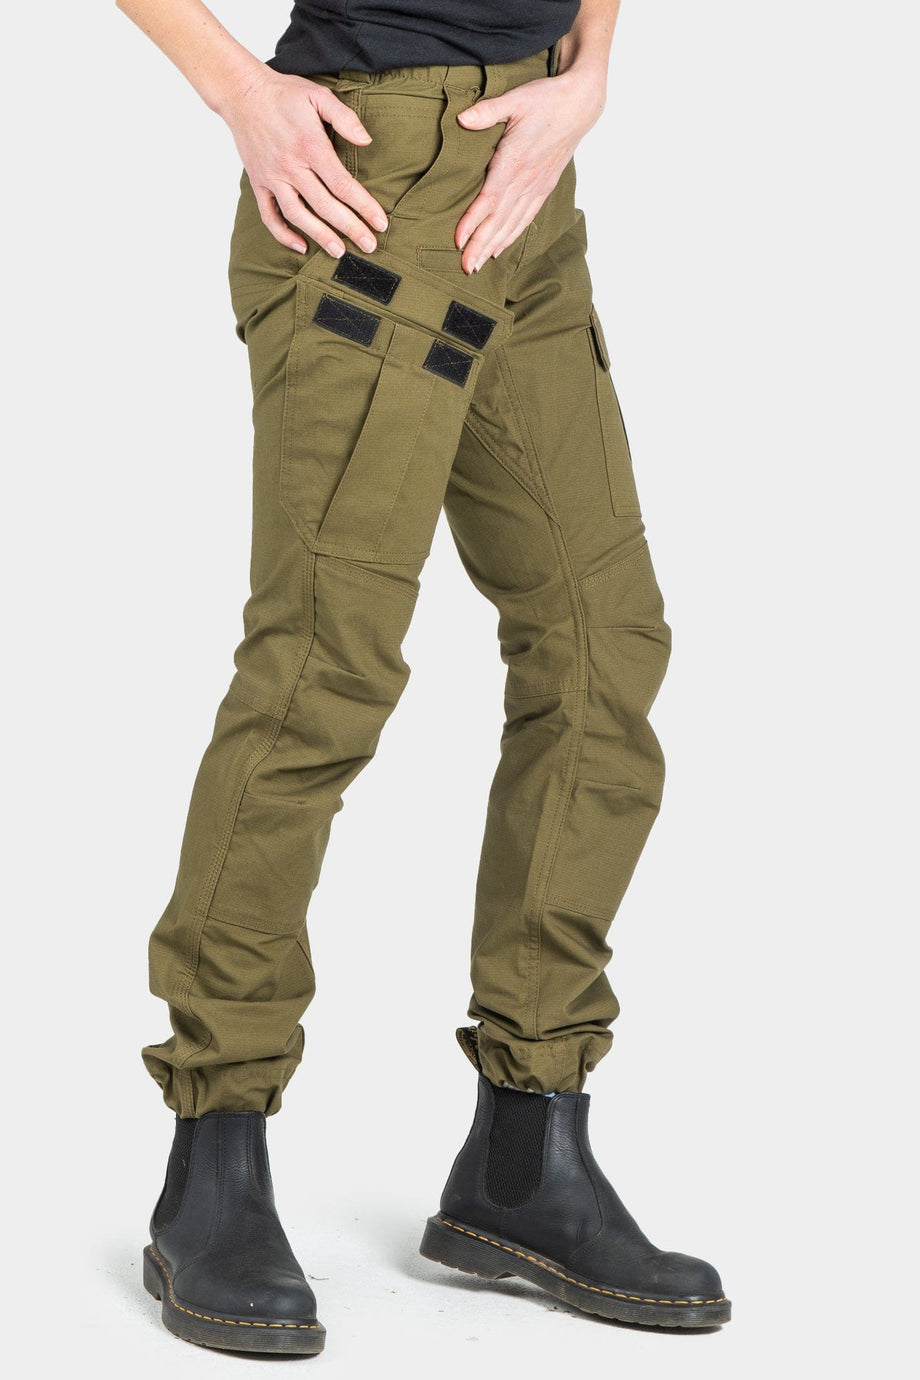 Women Olive Green Comuflage Cargo Pant, Waist Size: 28.0 at Rs 310/piece in  New Delhi